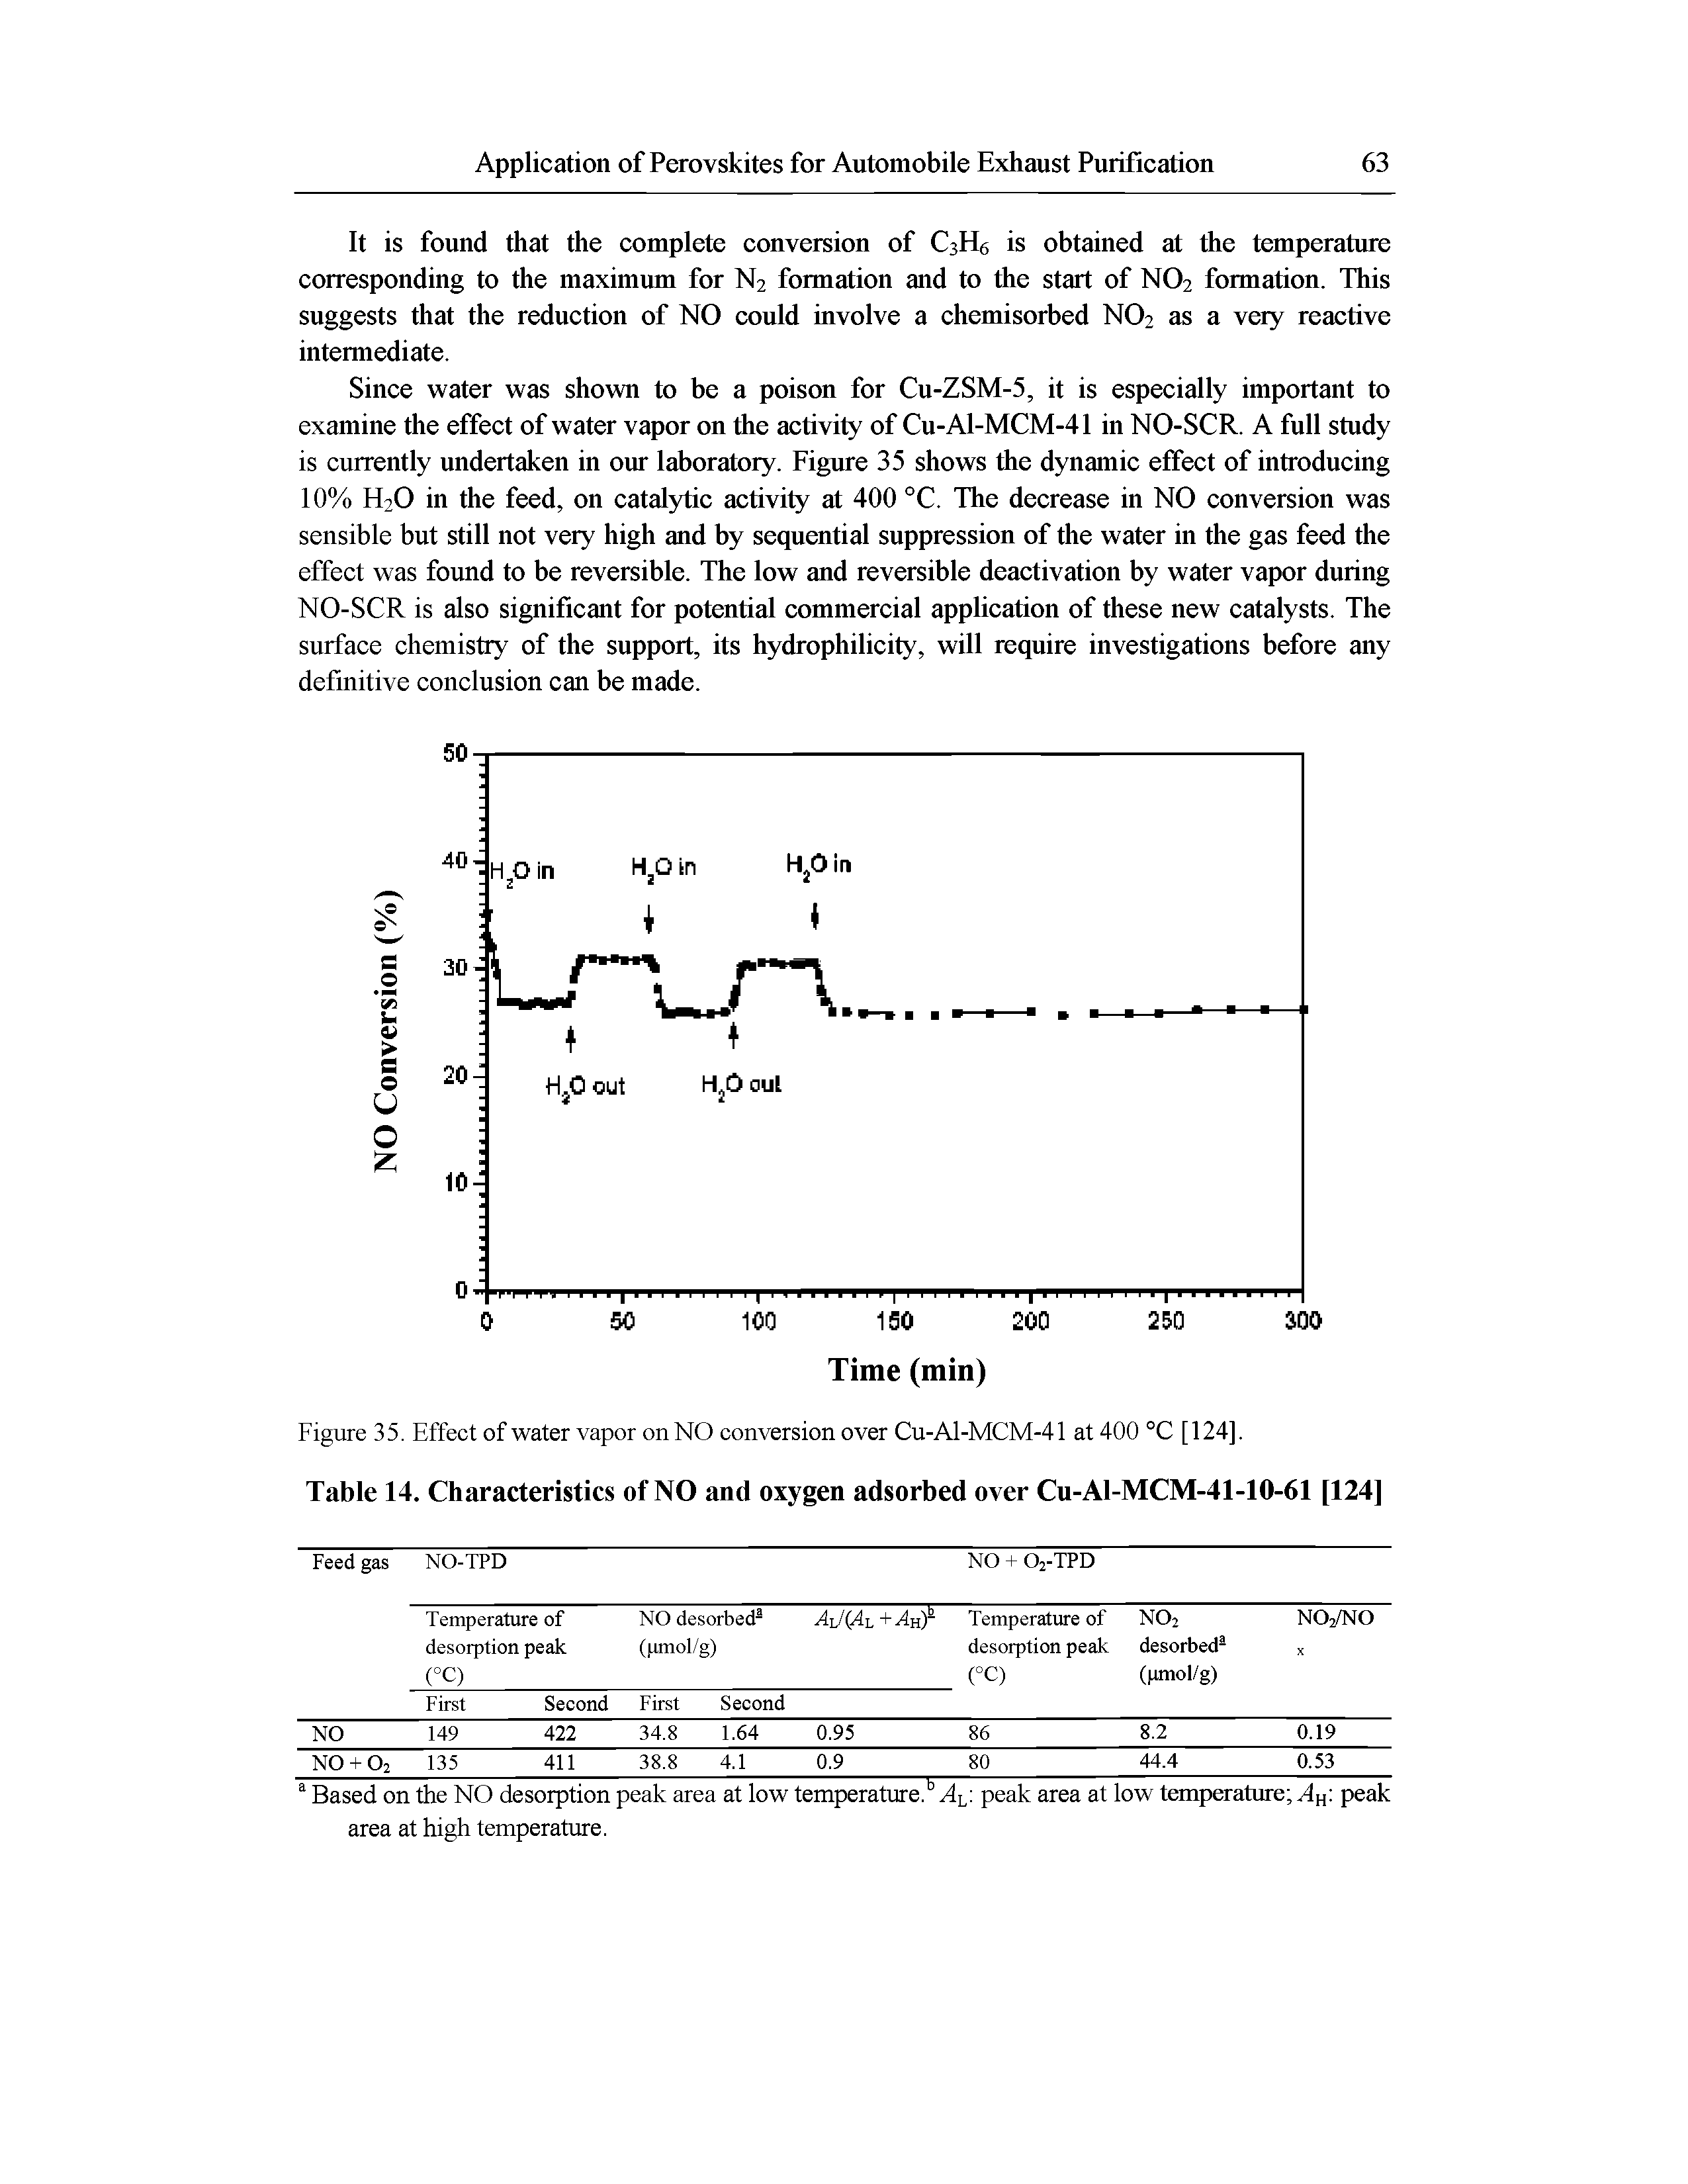 Figure 35. Effect of water vapor on NO conversion over Cu-Al-MCM-41 at 400 °C [124].